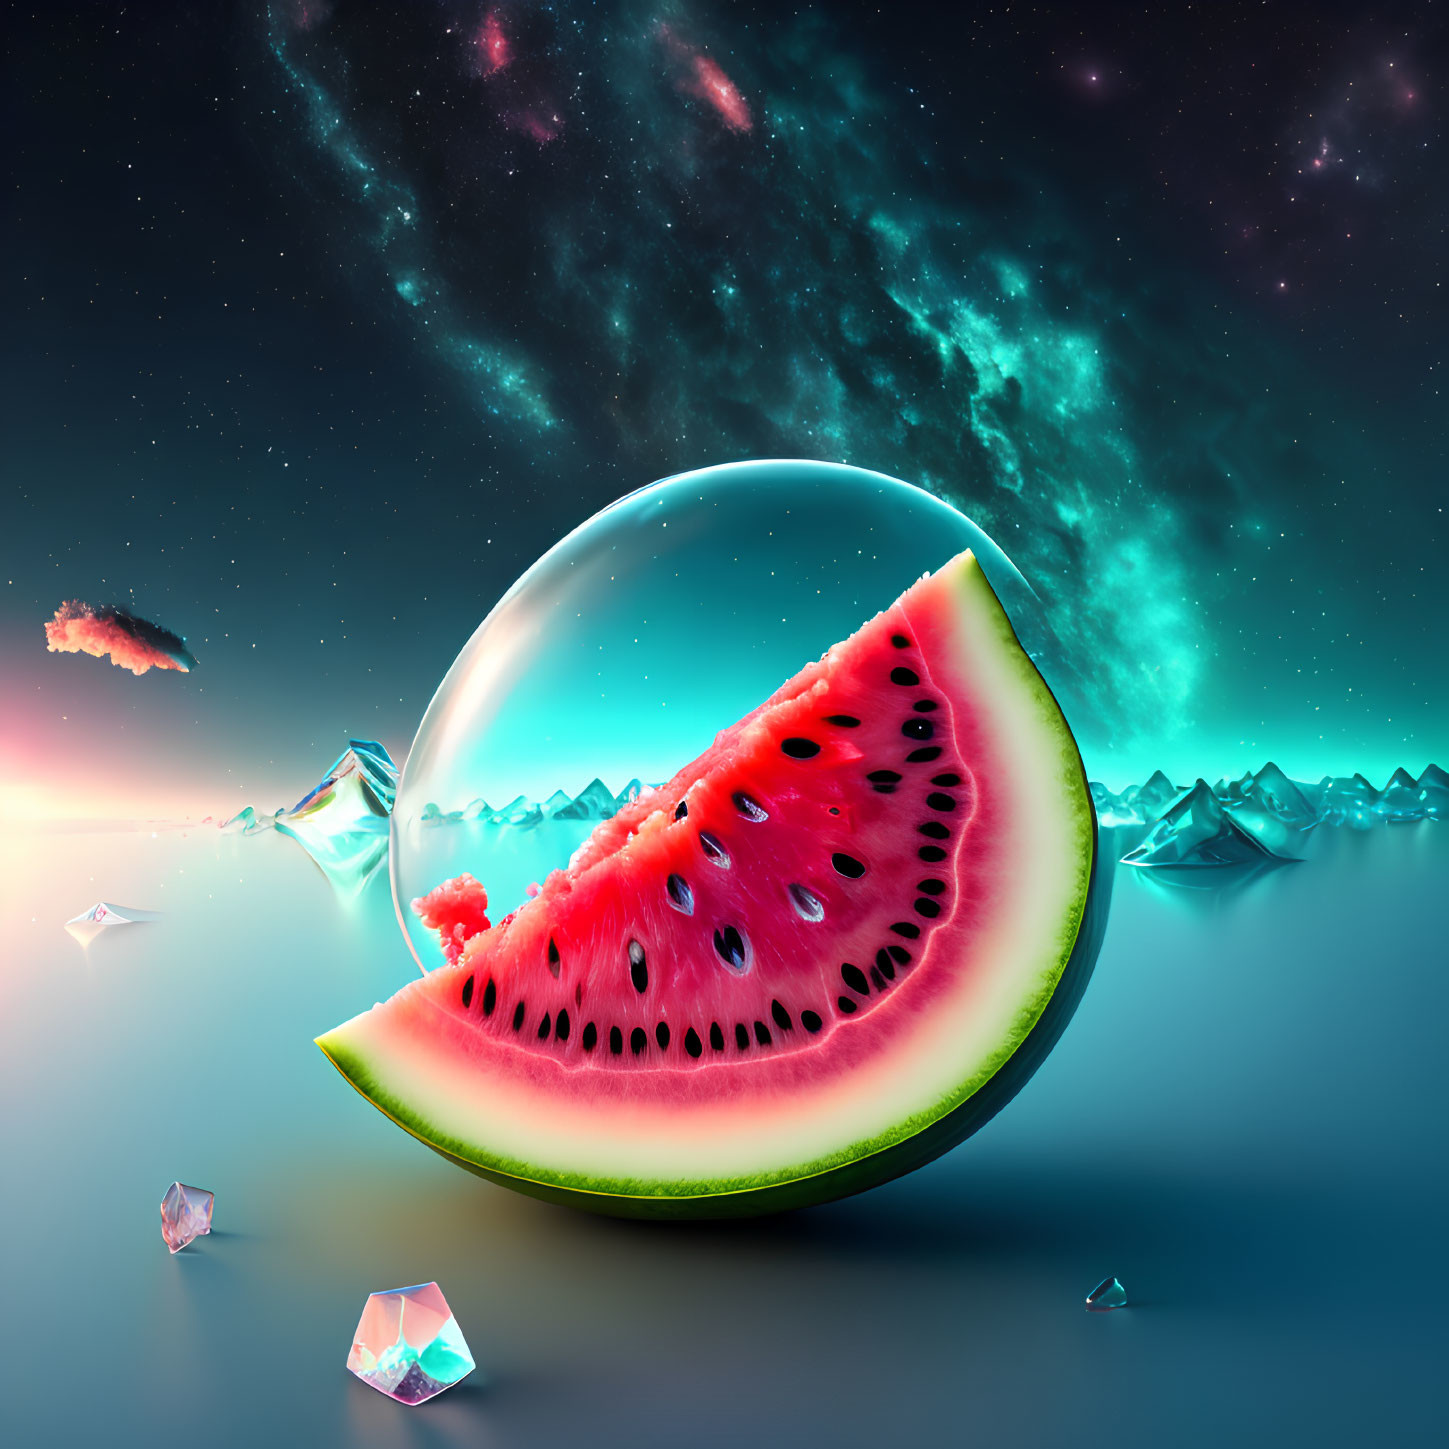 Surreal watermelon slice in cosmic space with stars and crystals